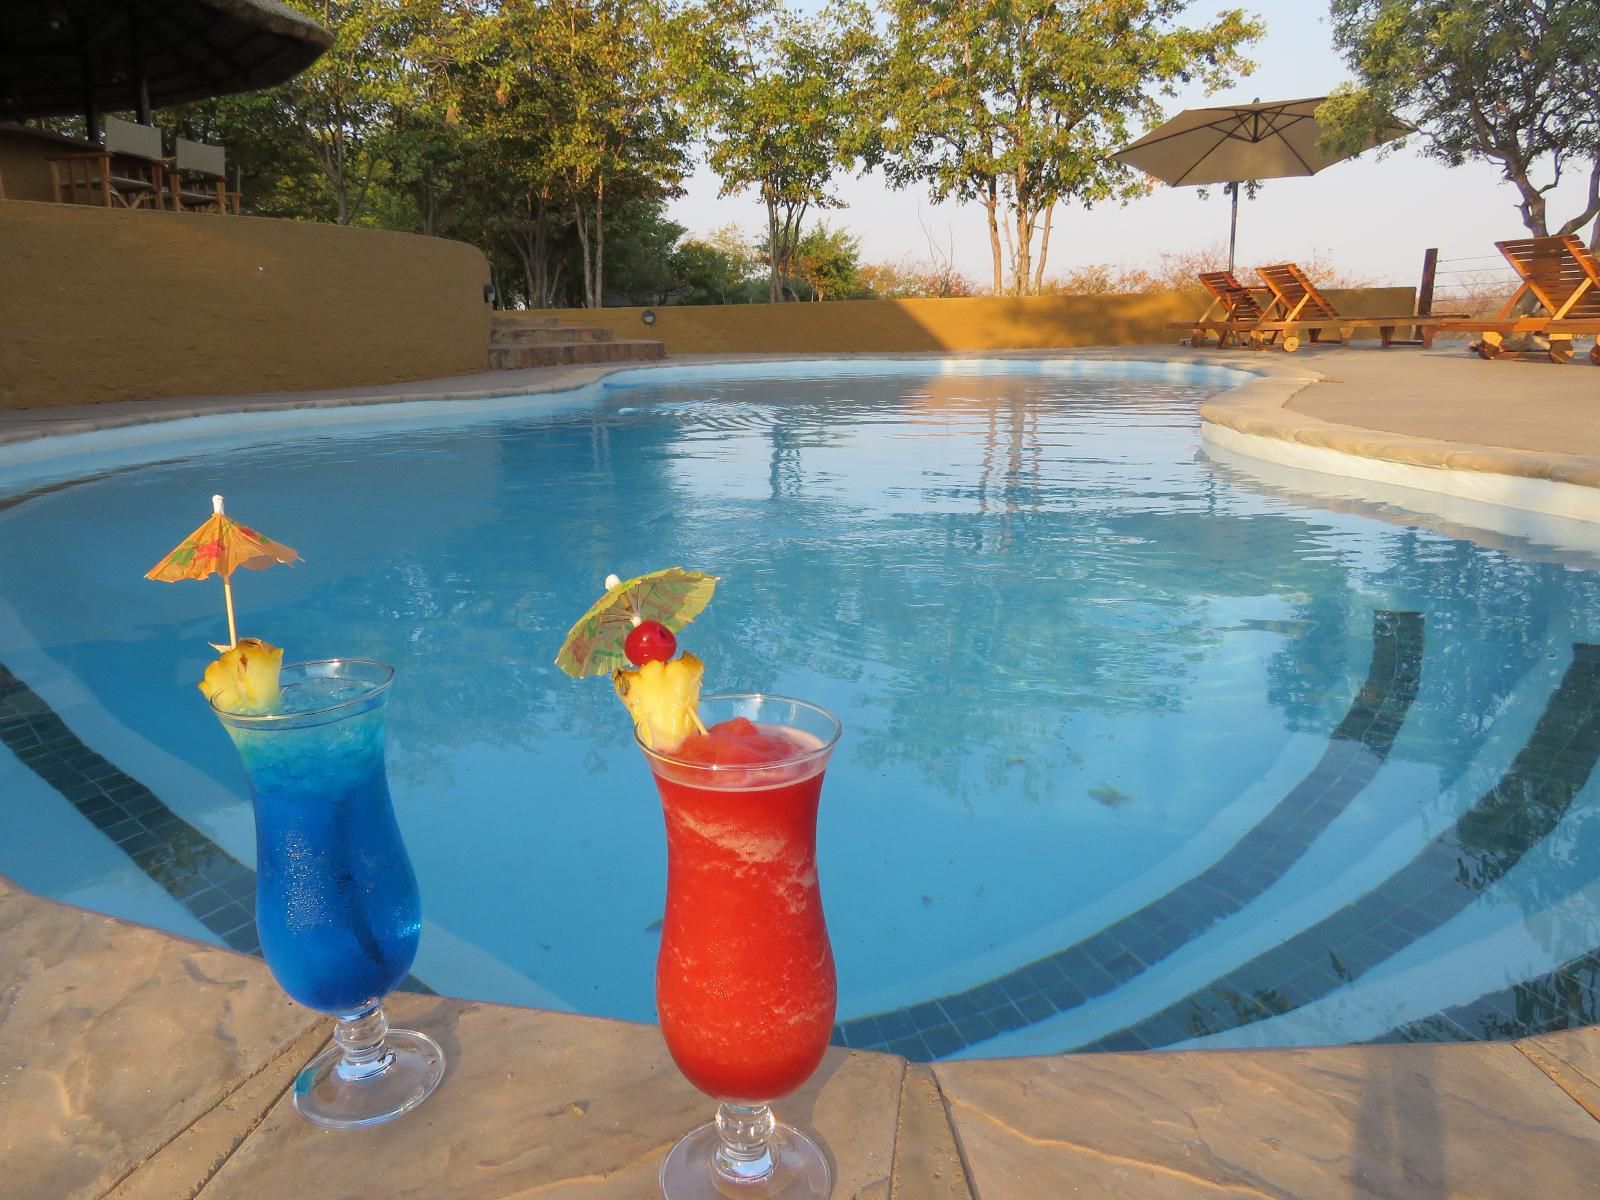 Mopane Bush Lodge Mapungubwe Region Limpopo Province South Africa Complementary Colors, Drink, Food, Swimming Pool